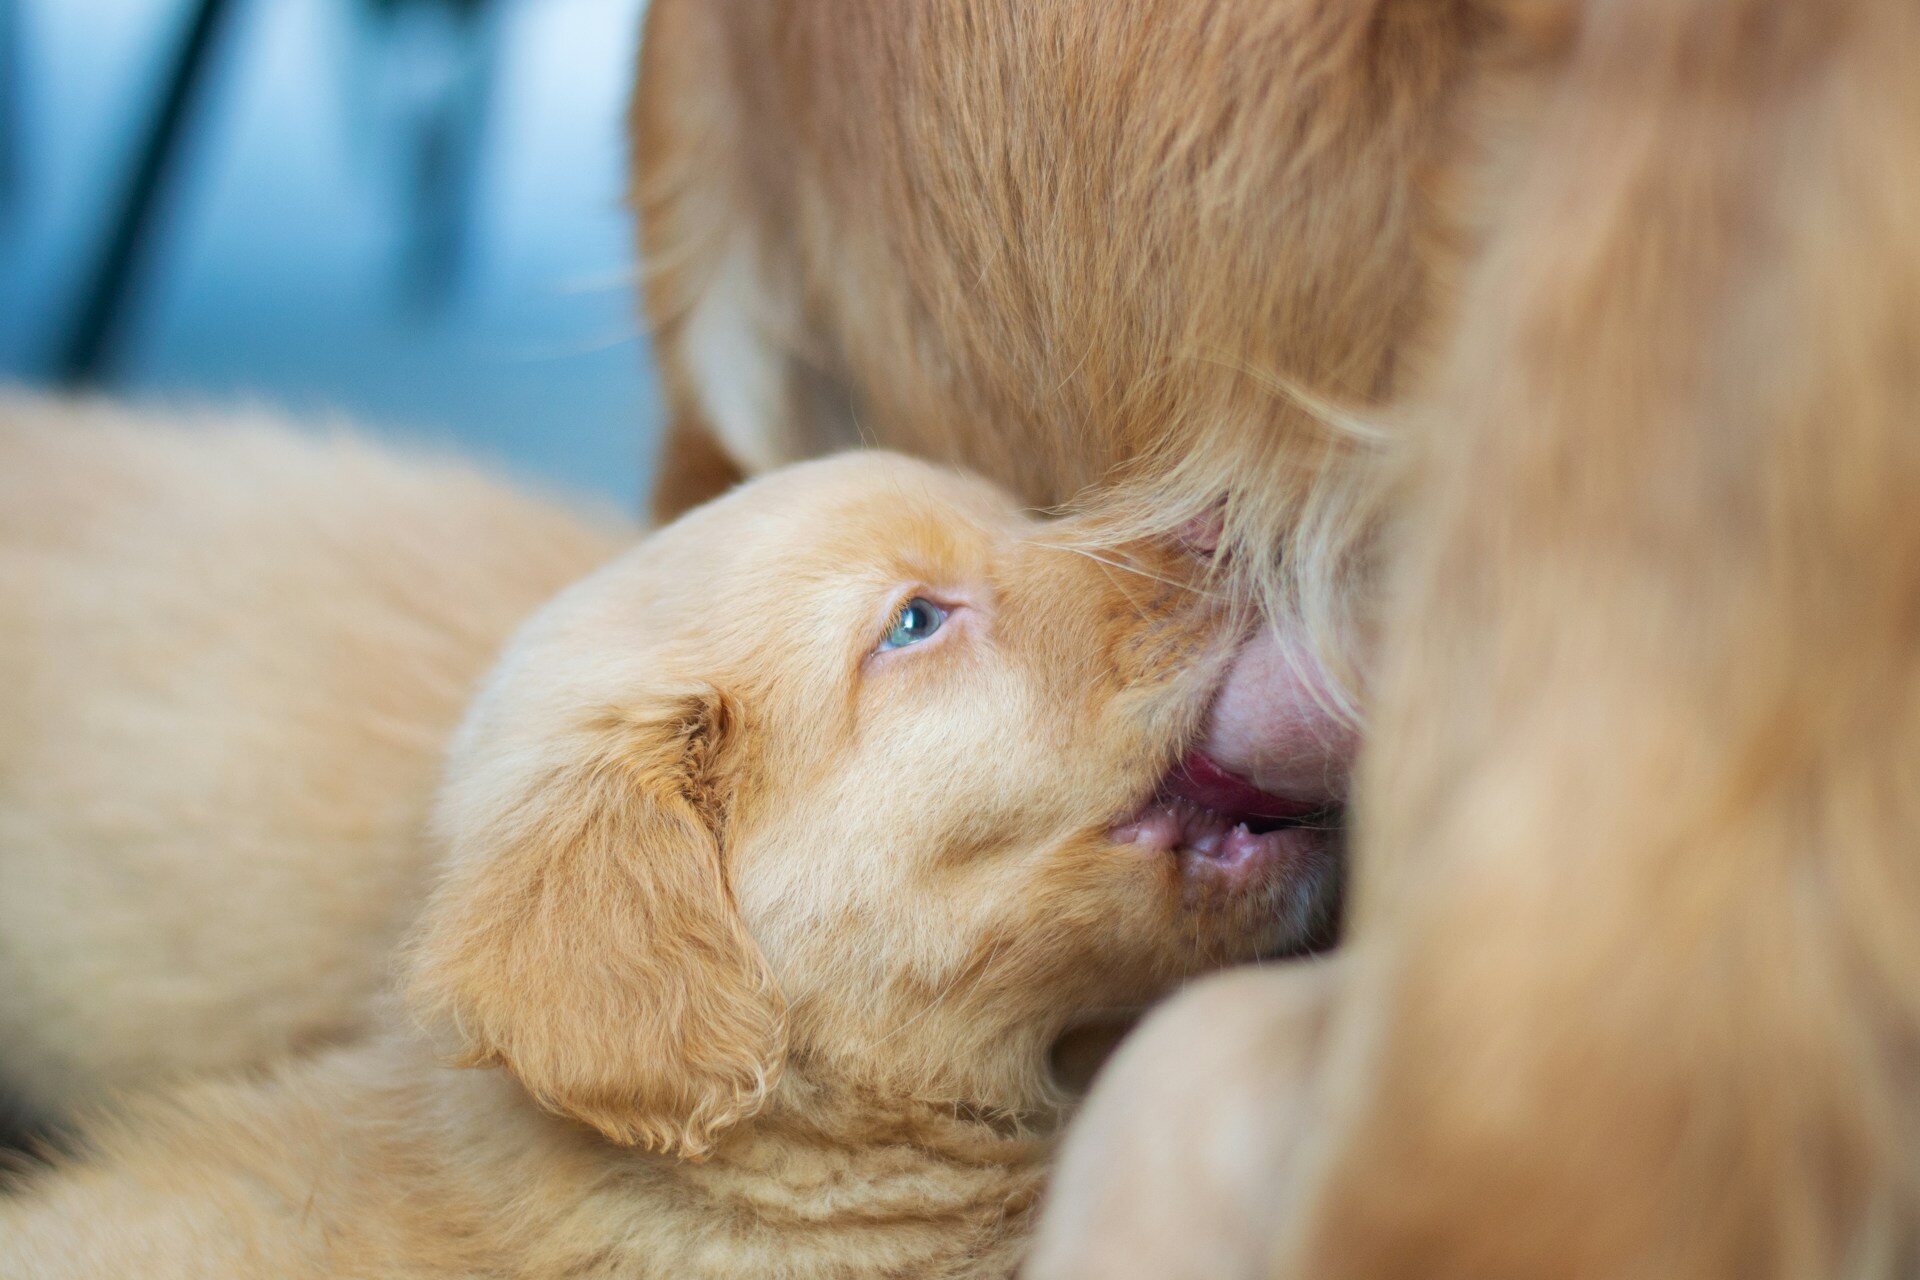 A puppy drinking milk from its mother's teat